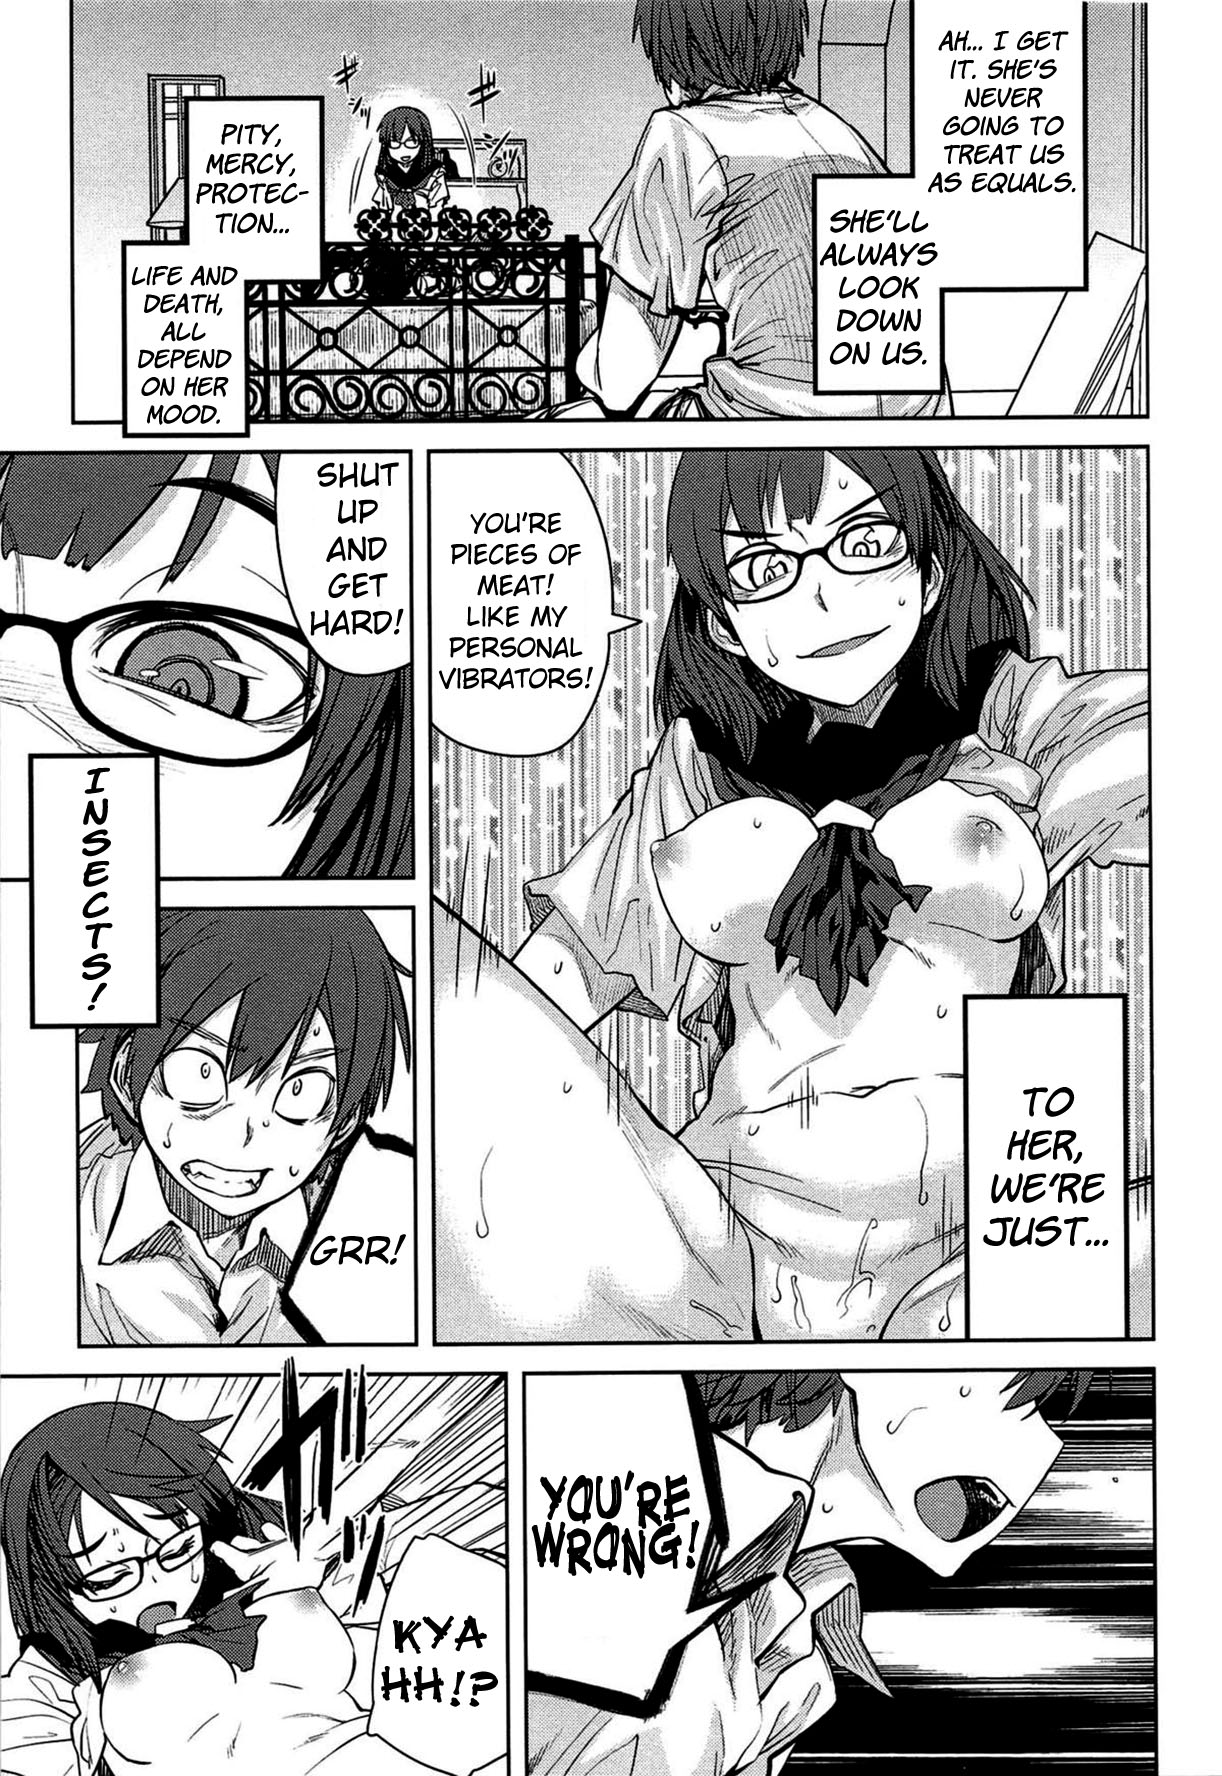 [Shimimaru] QUEENS GAME [English] page 36 full